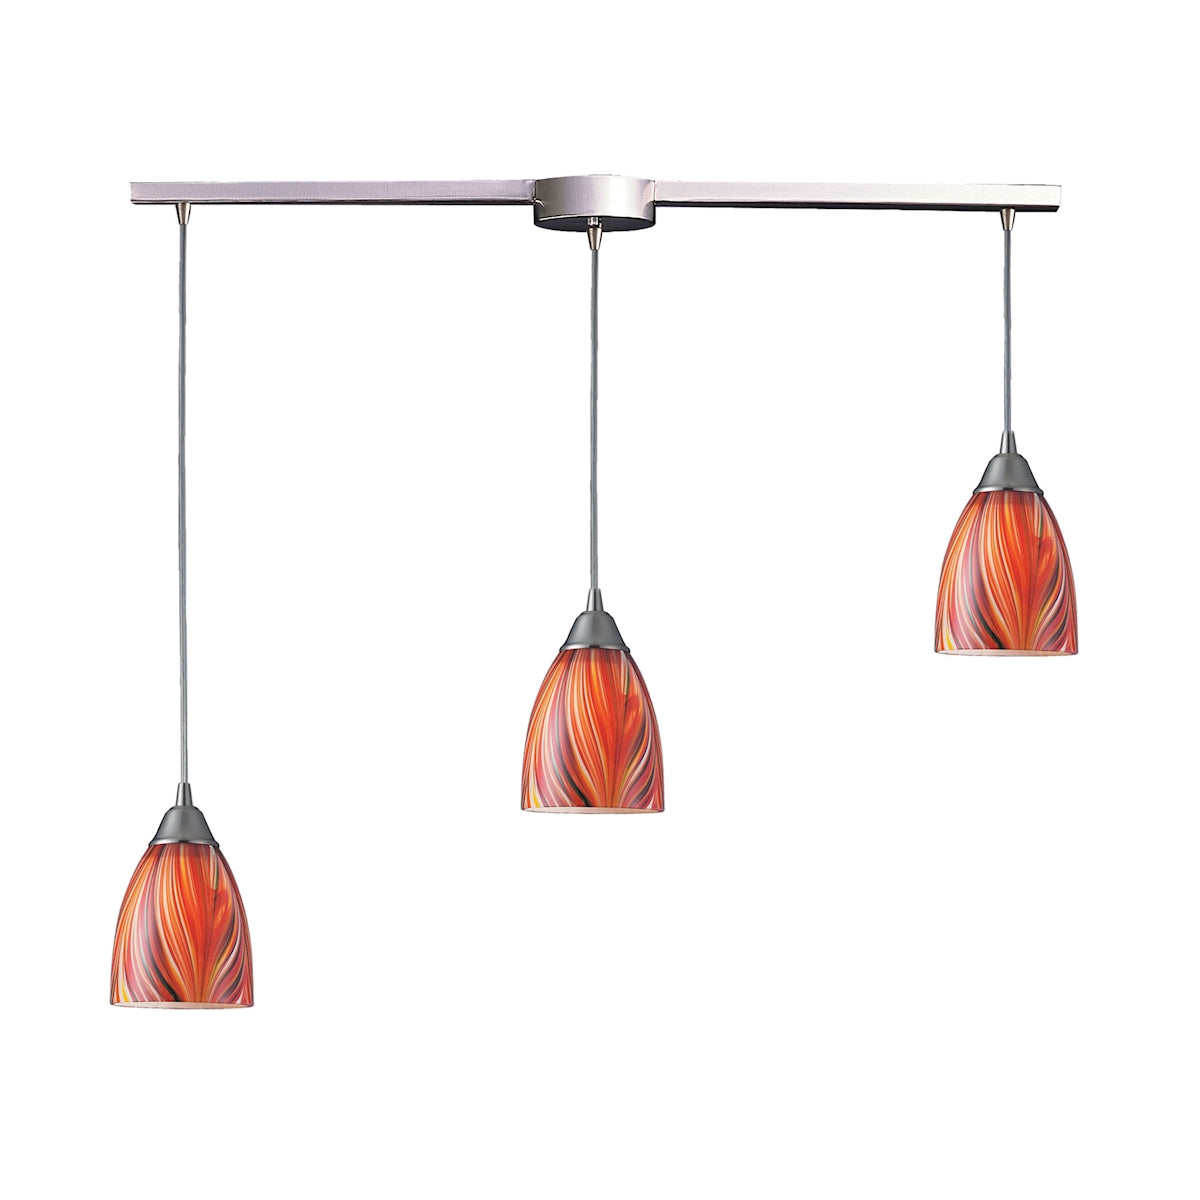 Arco Baleno 3-Light Linear Pendant Fixture in Satin Nickel with Multi-colored Glass